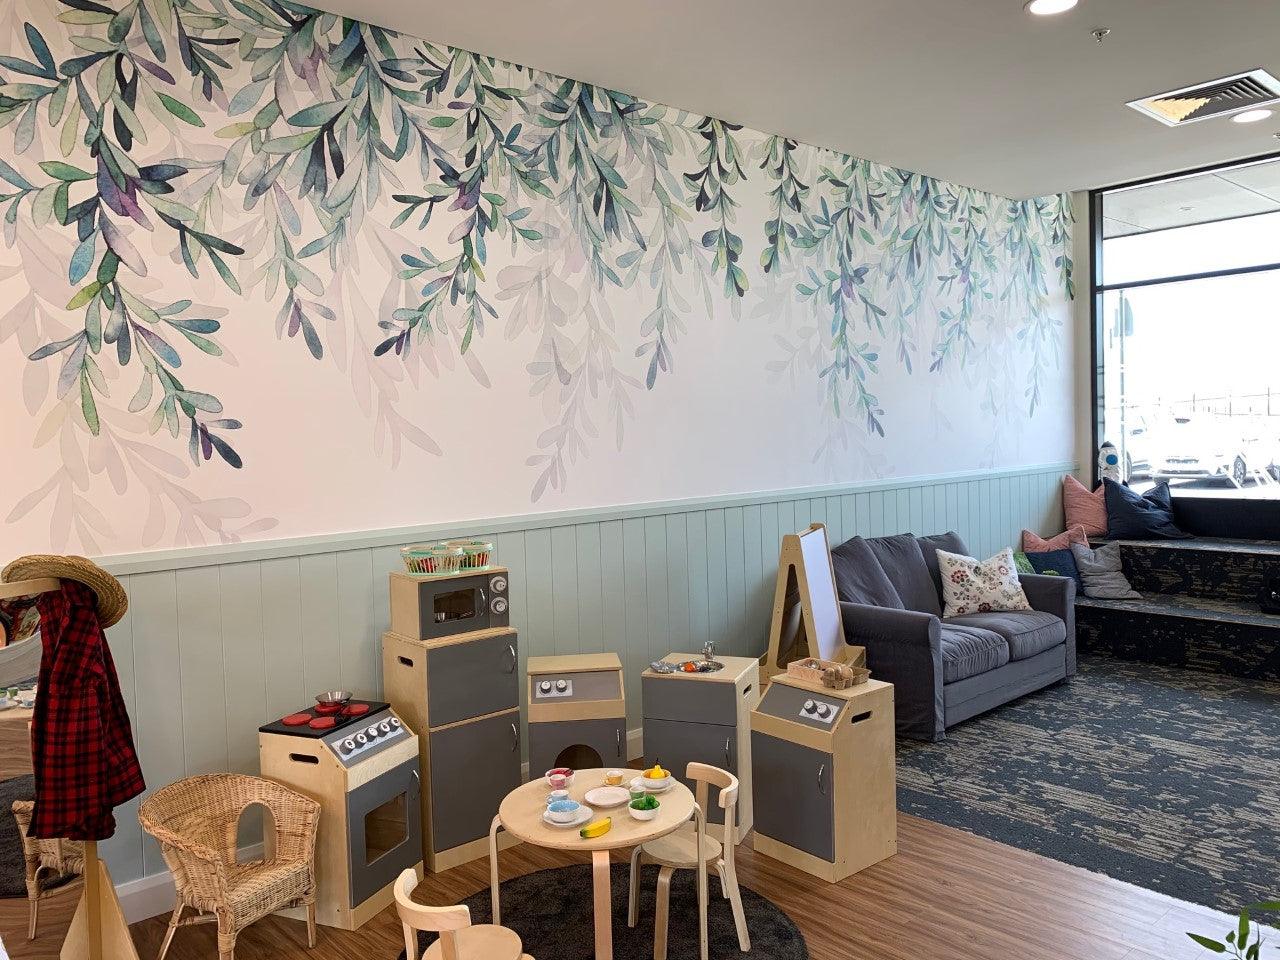 Enhancing Childcare Environments with Wall Murals, Decals, and Wallpaper: Creative Decoration Ideas - Jessartdecoration